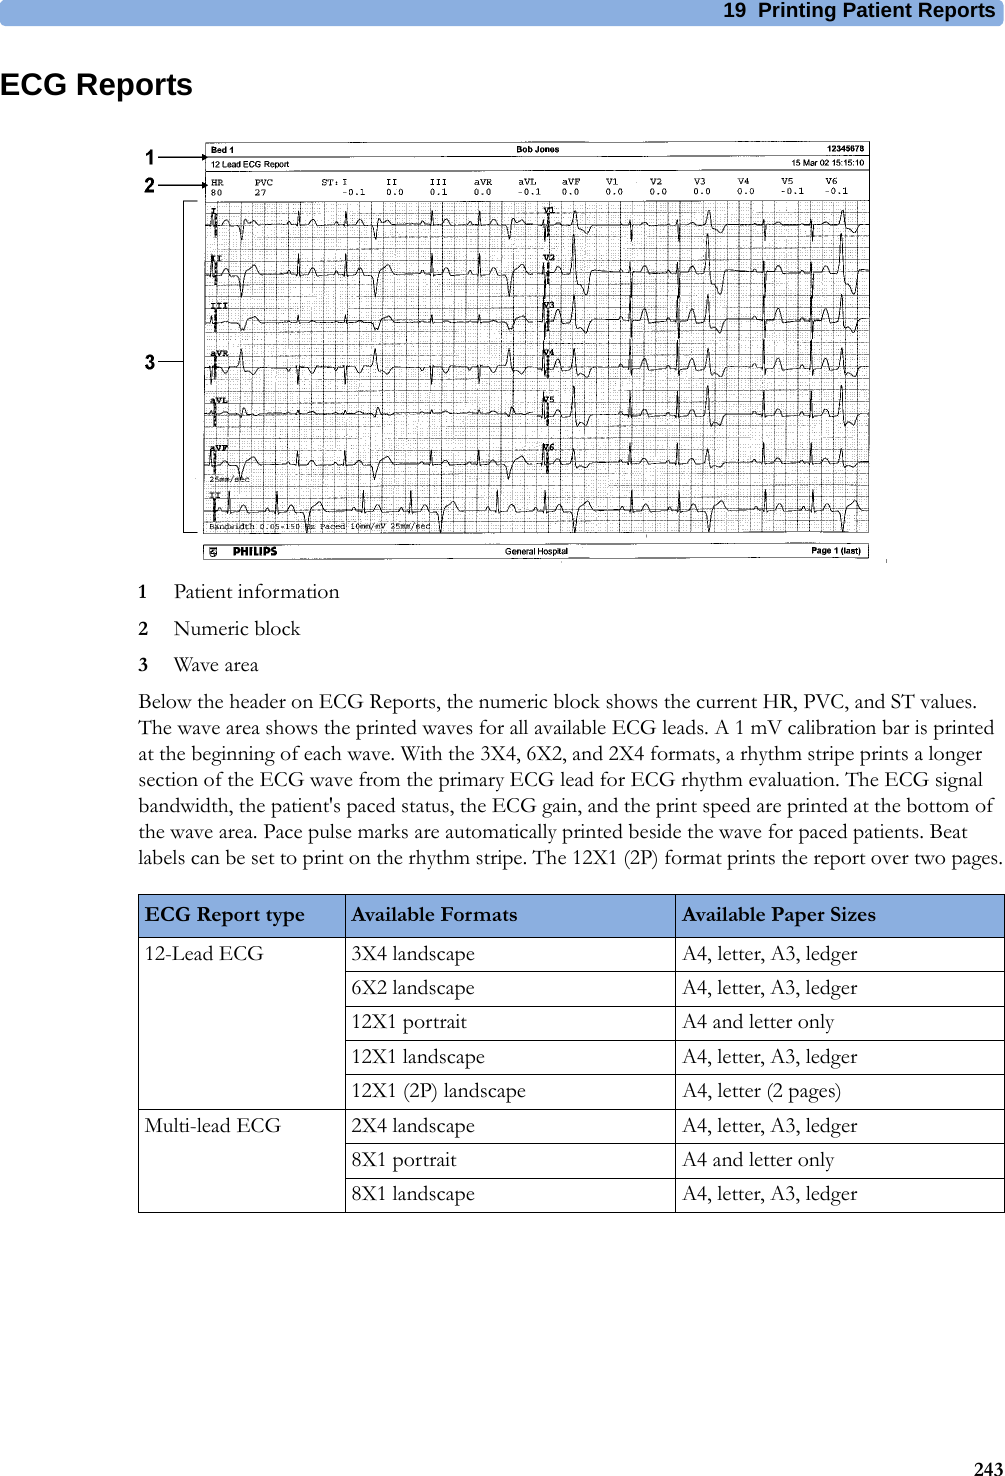 19 Printing Patient Reports243ECG Reports1Patient information2Numeric block3Wave areaBelow the header on ECG Reports, the numeric block shows the current HR, PVC, and ST values. The wave area shows the printed waves for all available ECG leads. A 1 mV calibration bar is printed at the beginning of each wave. With the 3X4, 6X2, and 2X4 formats, a rhythm stripe prints a longer section of the ECG wave from the primary ECG lead for ECG rhythm evaluation. The ECG signal bandwidth, the patient&apos;s paced status, the ECG gain, and the print speed are printed at the bottom of the wave area. Pace pulse marks are automatically printed beside the wave for paced patients. Beat labels can be set to print on the rhythm stripe. The 12X1 (2P) format prints the report over two pages.ECG Report type Available Formats Available Paper Sizes12-Lead ECG 3X4 landscape A4, letter, A3, ledger6X2 landscape A4, letter, A3, ledger12X1 portrait A4 and letter only12X1 landscape A4, letter, A3, ledger12X1 (2P) landscape A4, letter (2 pages)Multi-lead ECG 2X4 landscape A4, letter, A3, ledger8X1 portrait A4 and letter only8X1 landscape A4, letter, A3, ledger